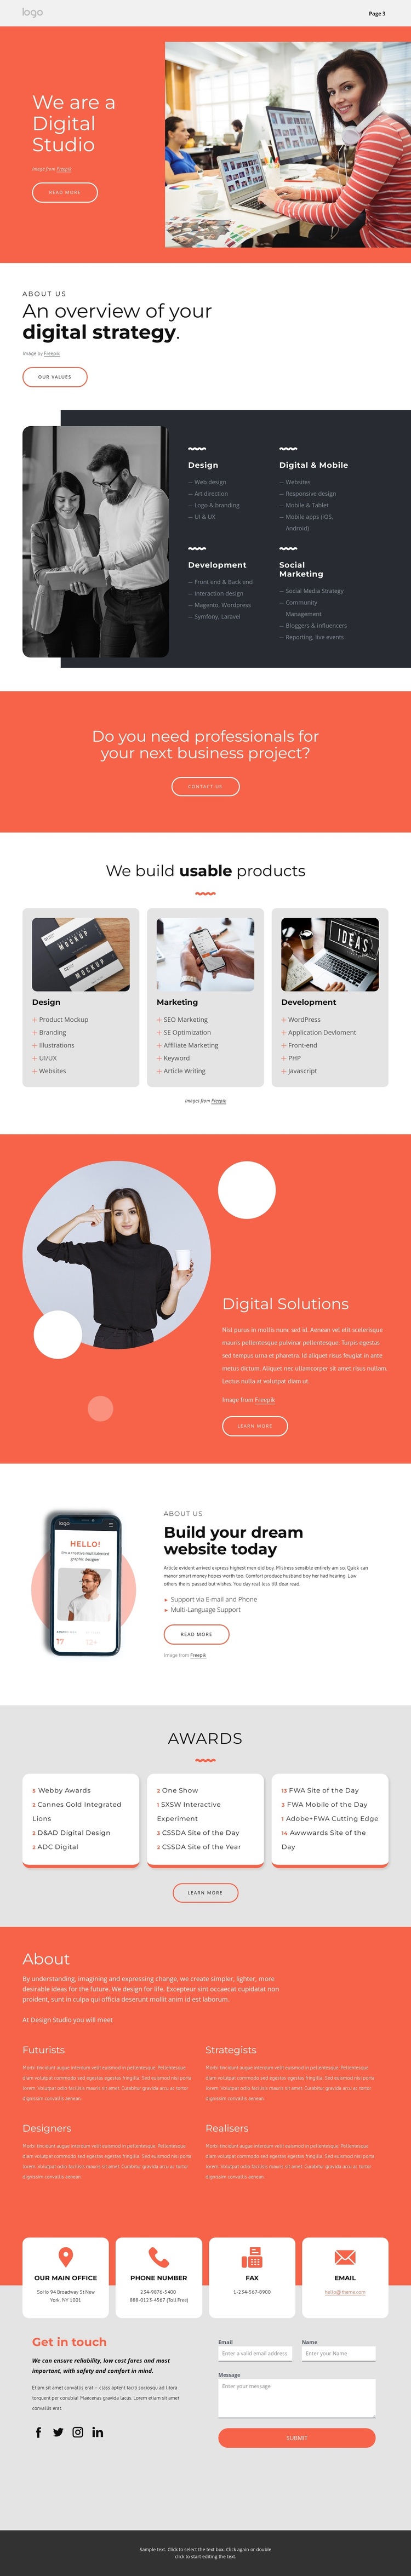 We are the great digital studio Template